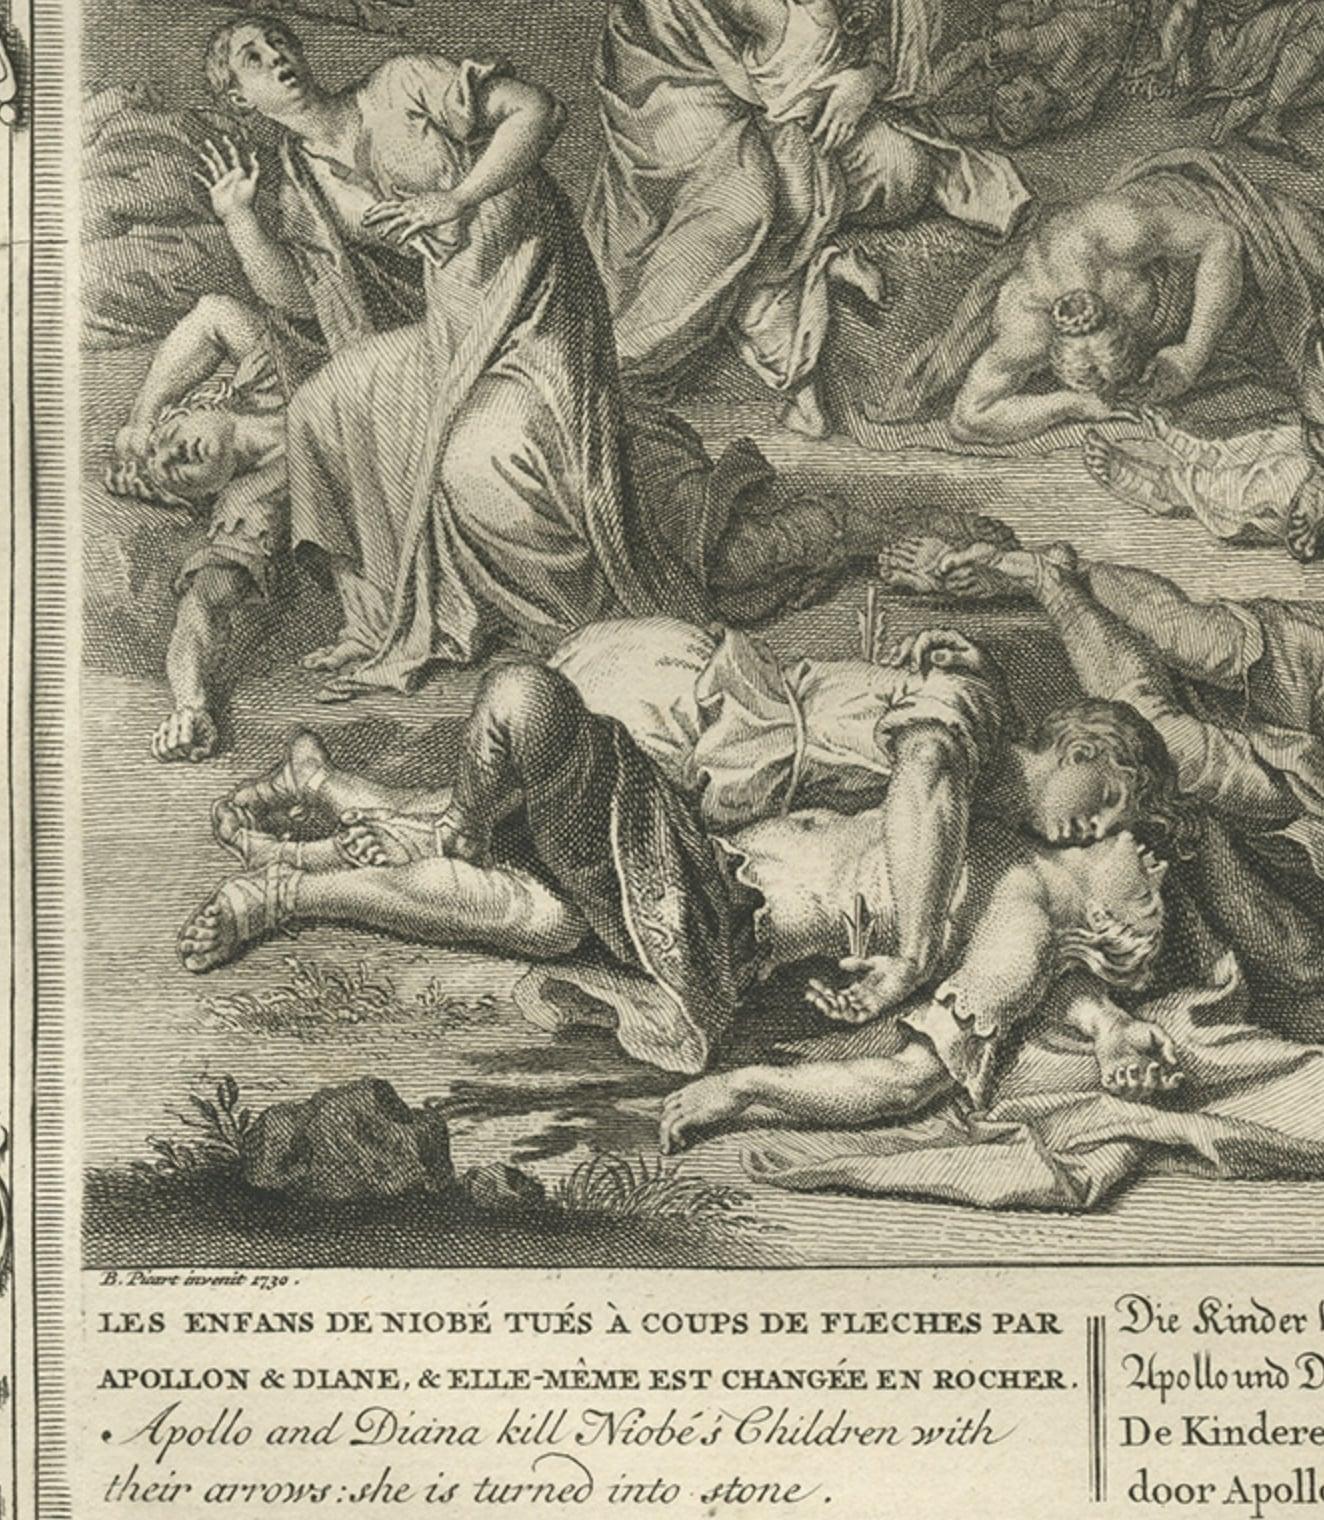 Antique print titled 'Les Enfans de Niobé Tués (..)'. This print depicts Apollo and Diana killing Niobe's Children with their arrows. In Greek mythology Niobe was a daughter of Tantalus and the sister of Pelops. Niobe boasted of her superiority to